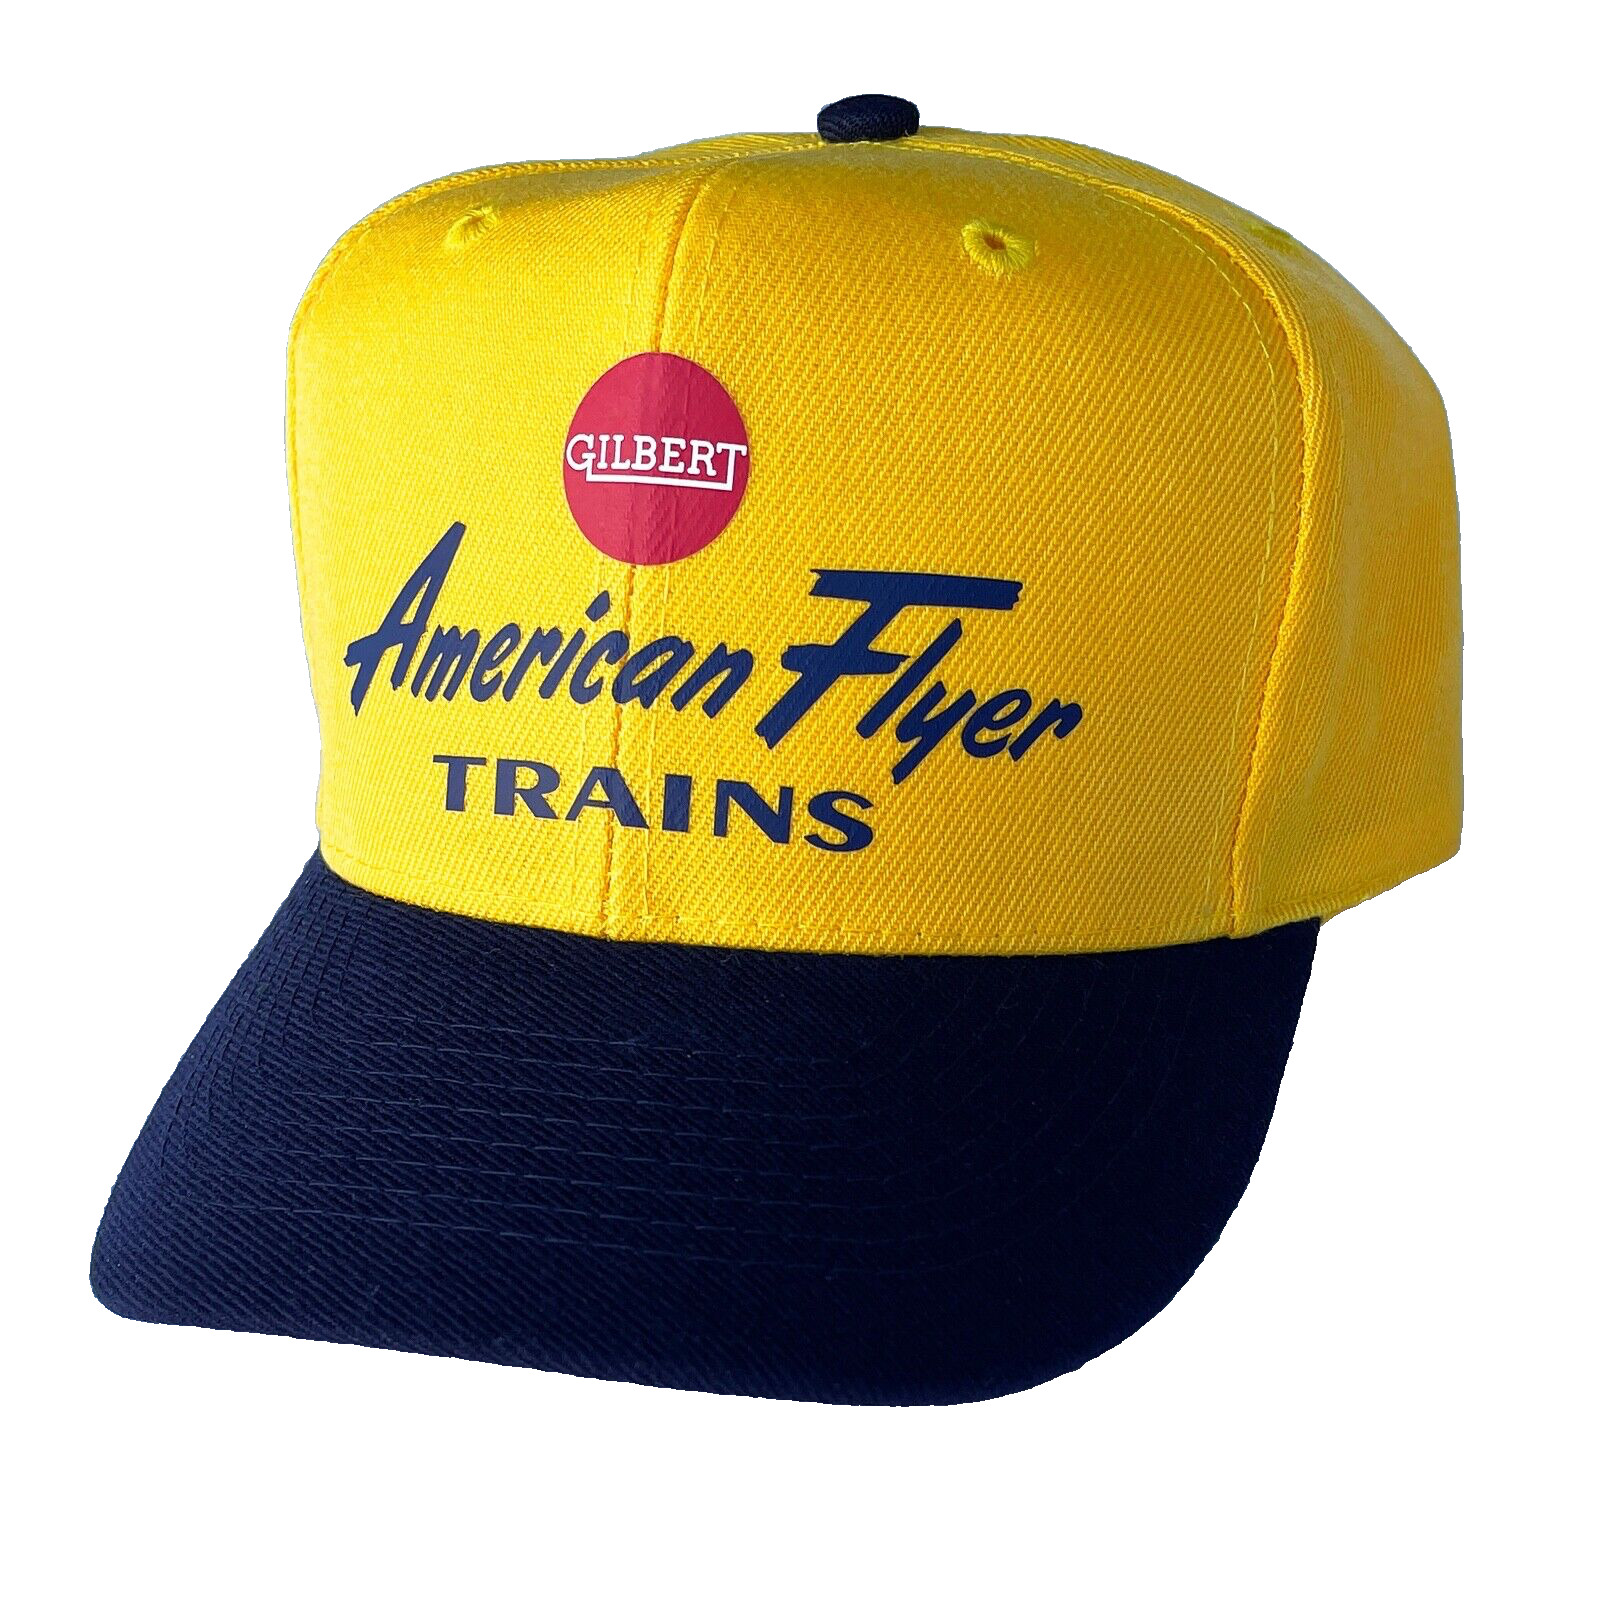 Gilbert AMERICAN FLYER TRAINS Collector\'s Hat. NEW